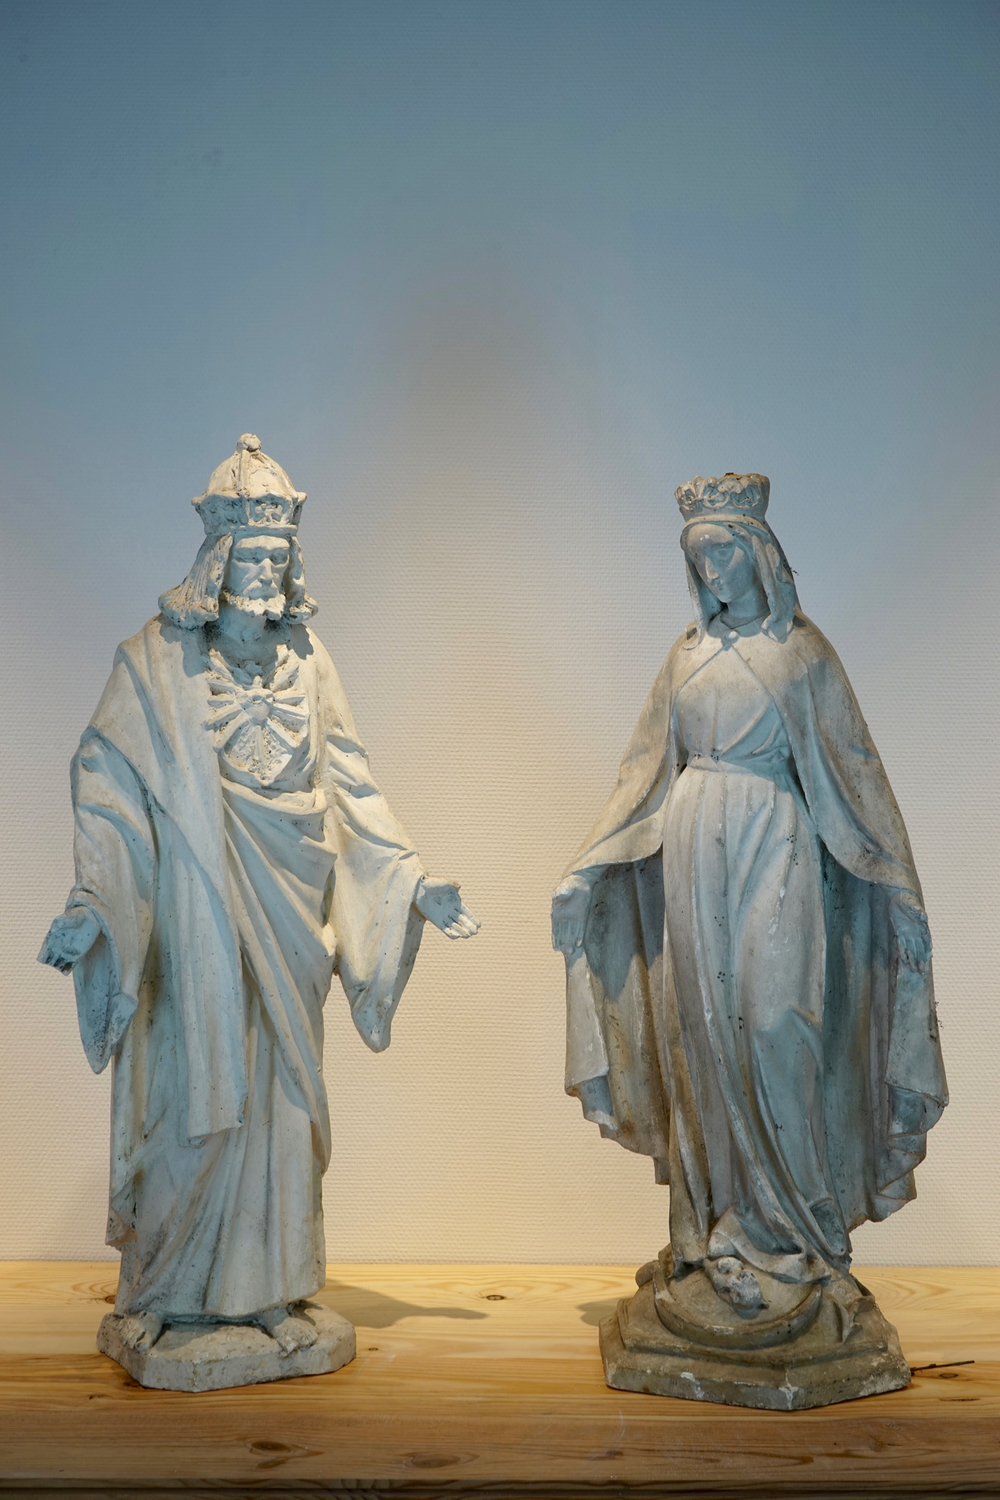 A set of two 96 cm plaster casts of religious figures, 19/20th C., Bruges